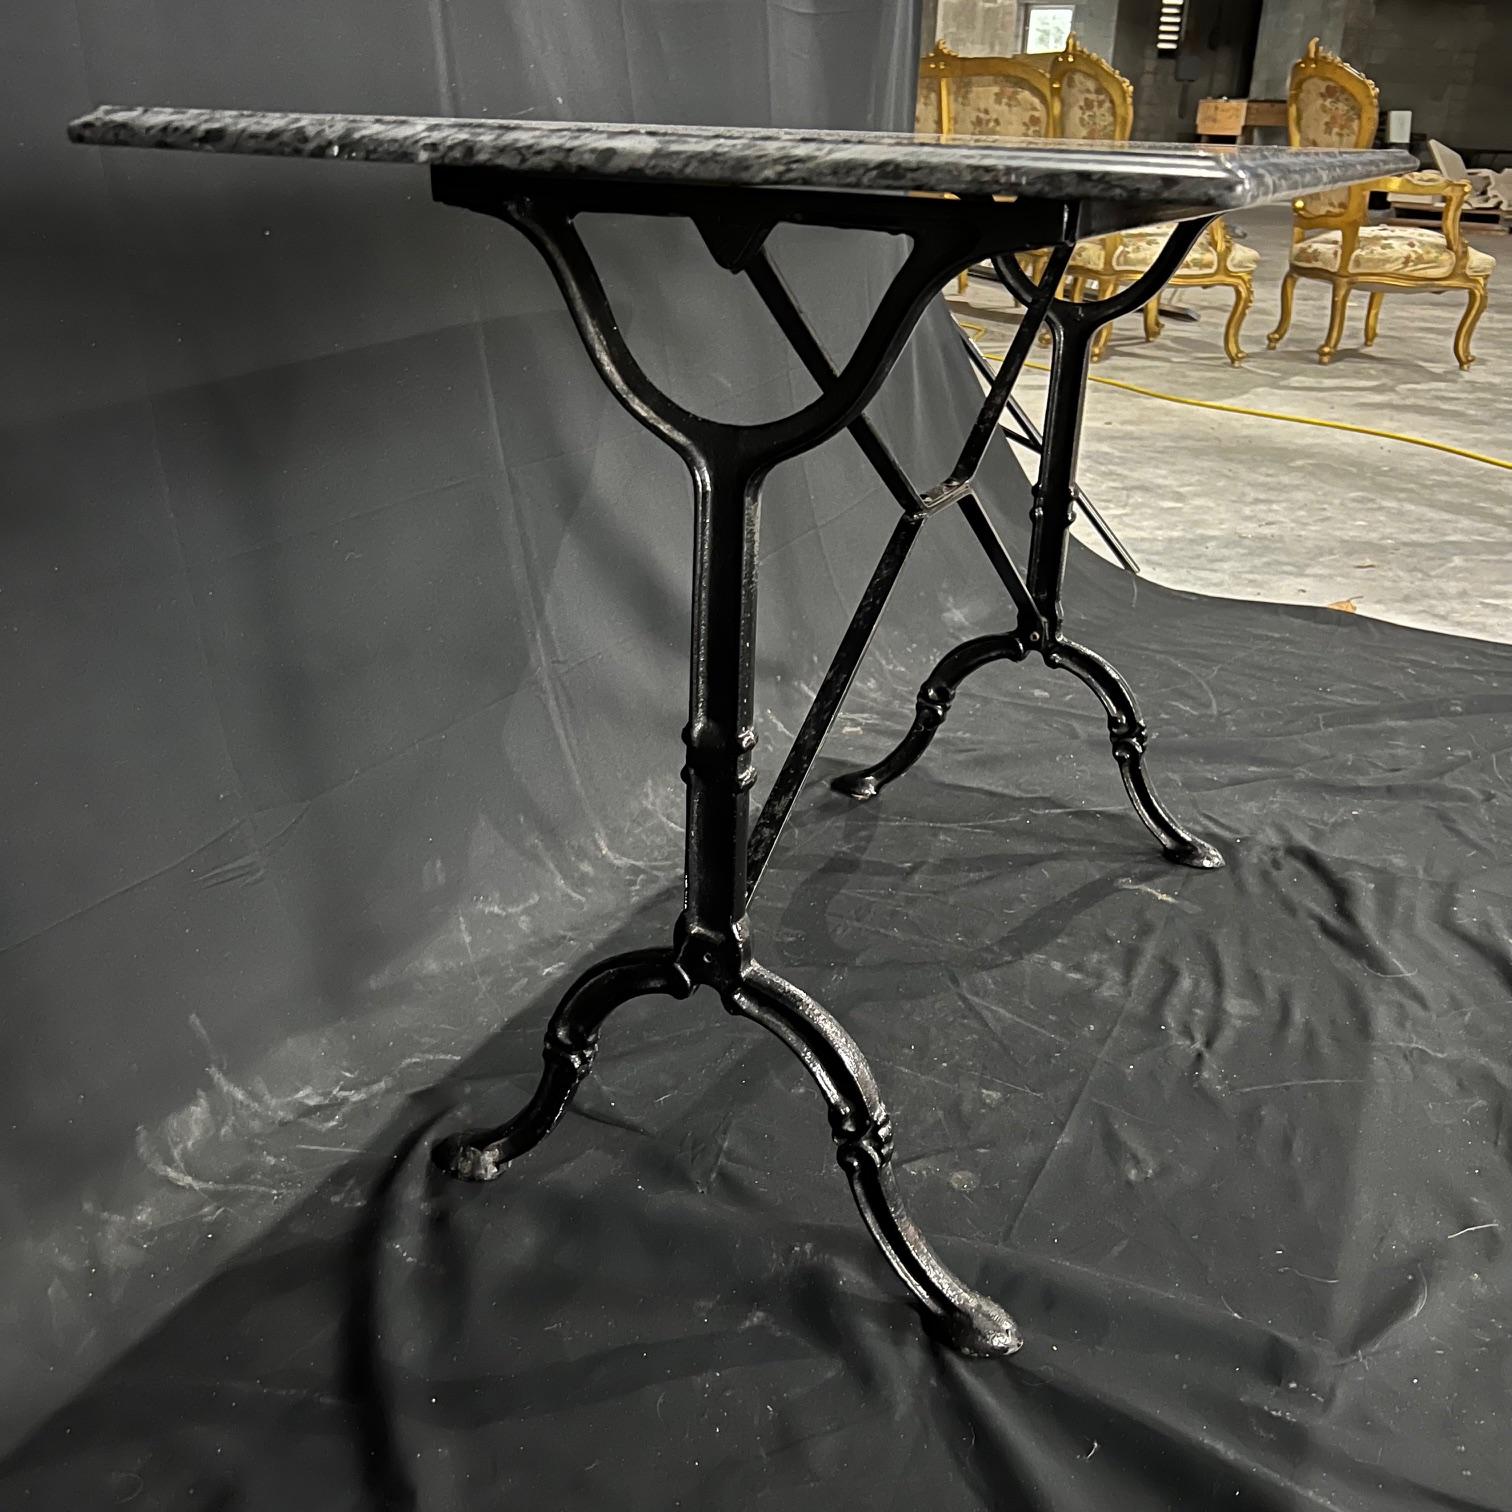 Versatile French marble top rectangular cafe table or writing desk with a classic Provencal black iron base. Marble is a stunning black marble with veining. There are some scratches at one end commensurate with age. Very nice beveled edge on all